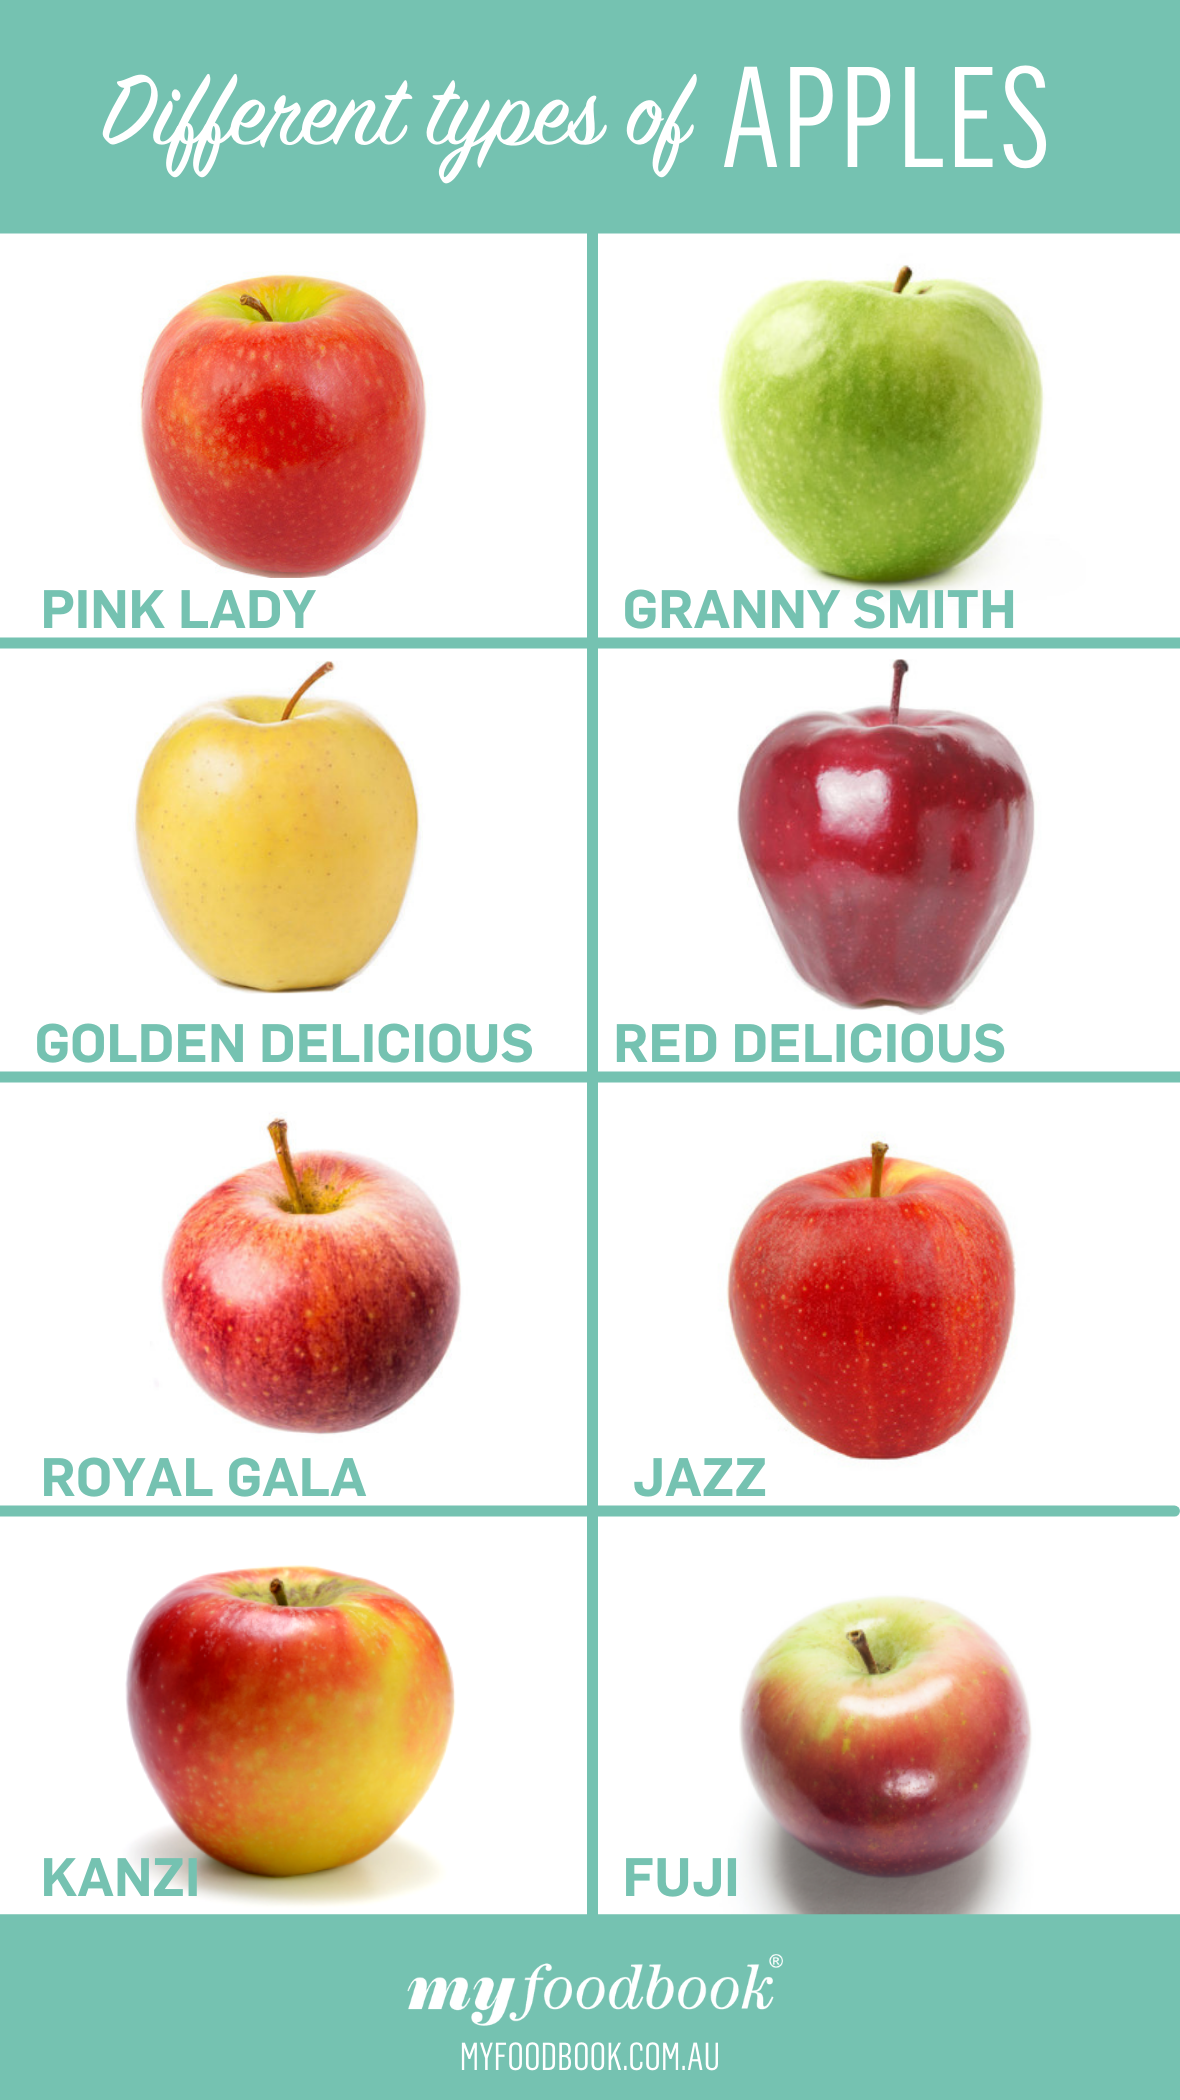 Types of Apples